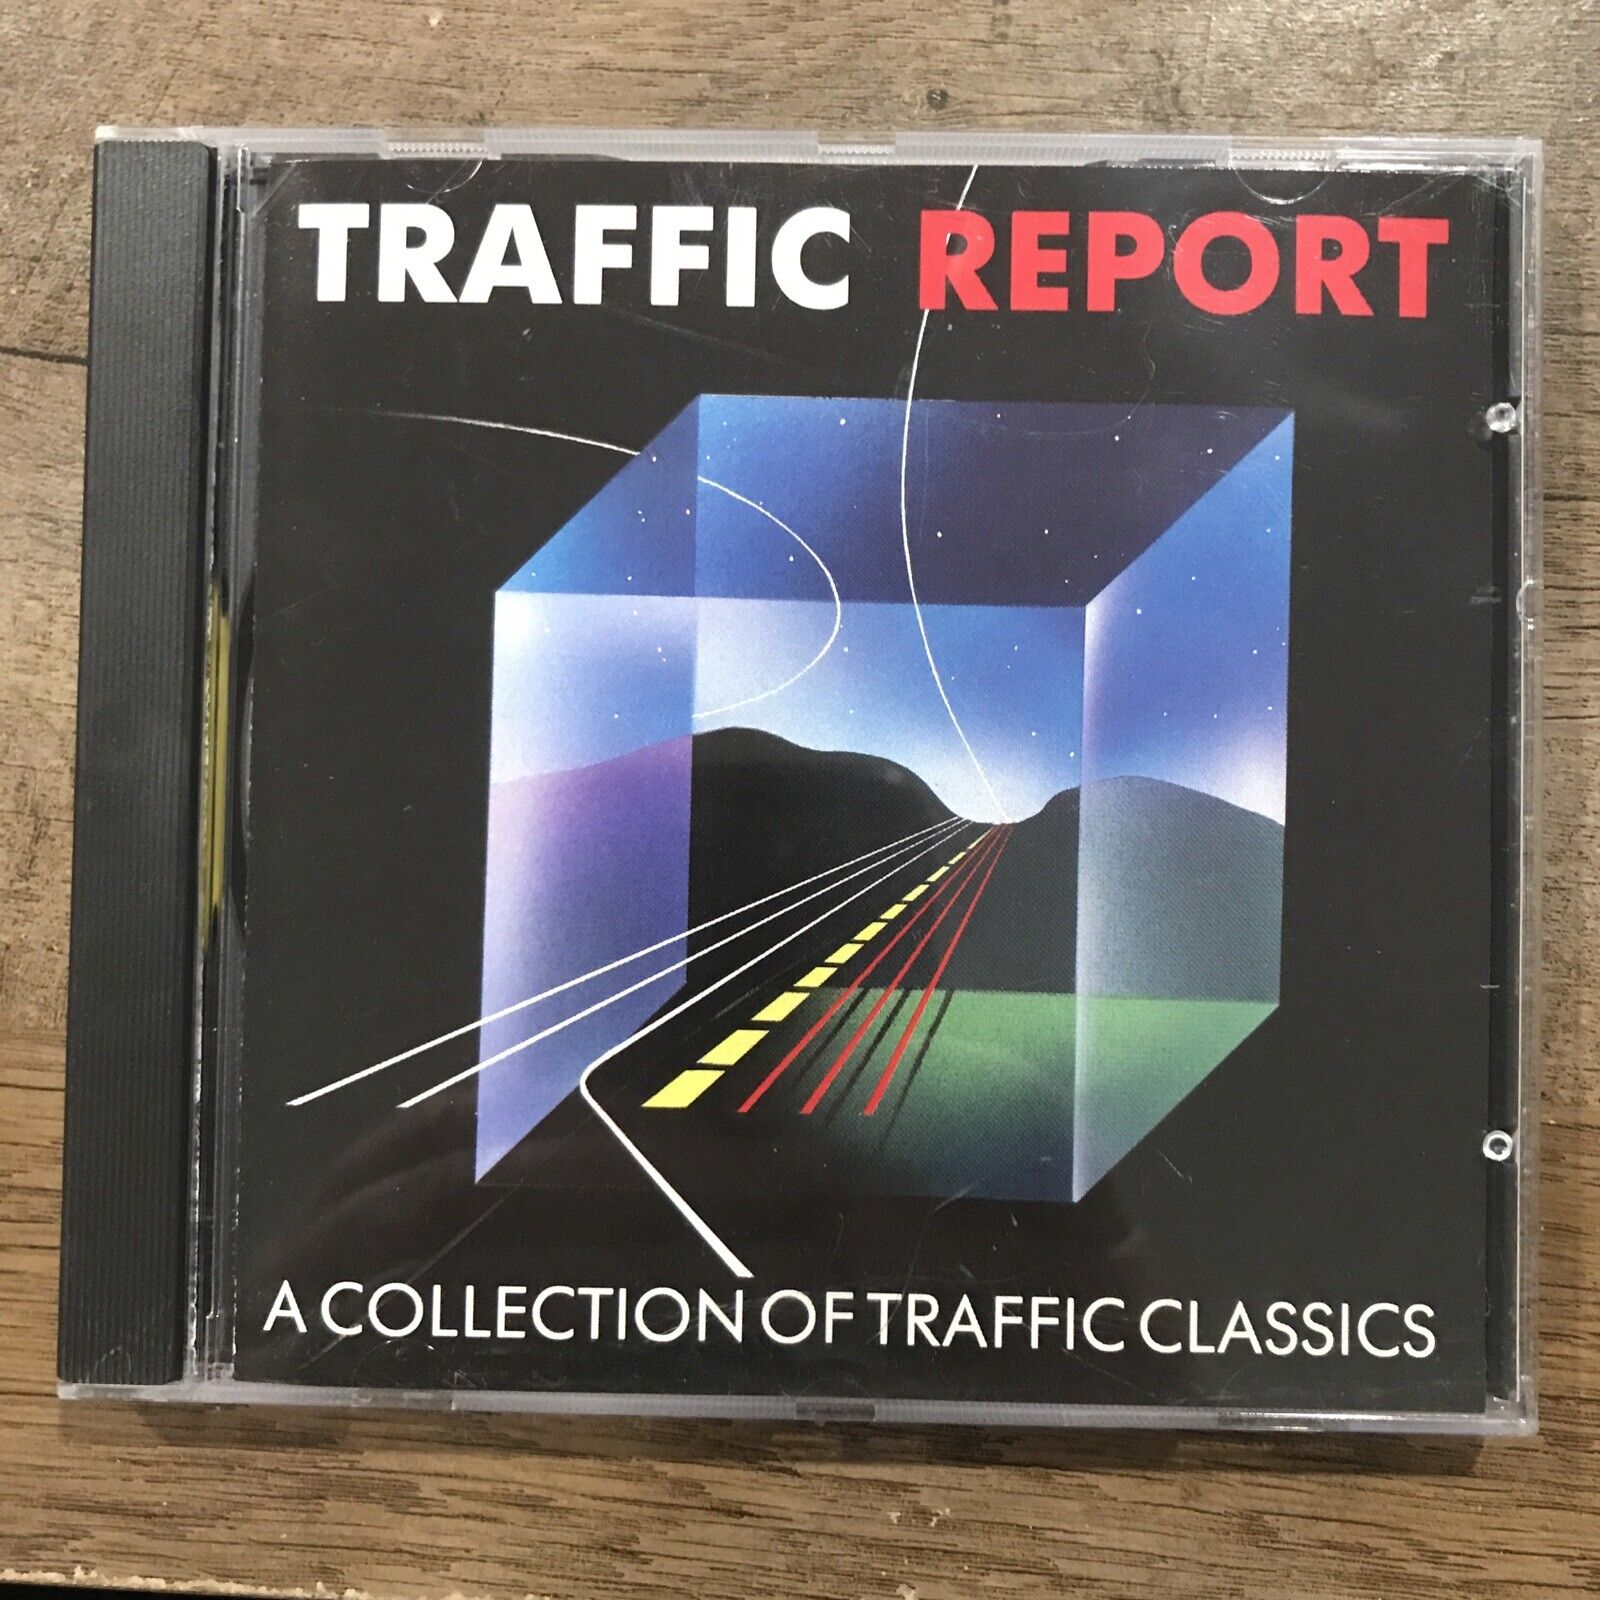 Traffic Report CD A Collection Of Traffic Classics 1987 Like New Promotional